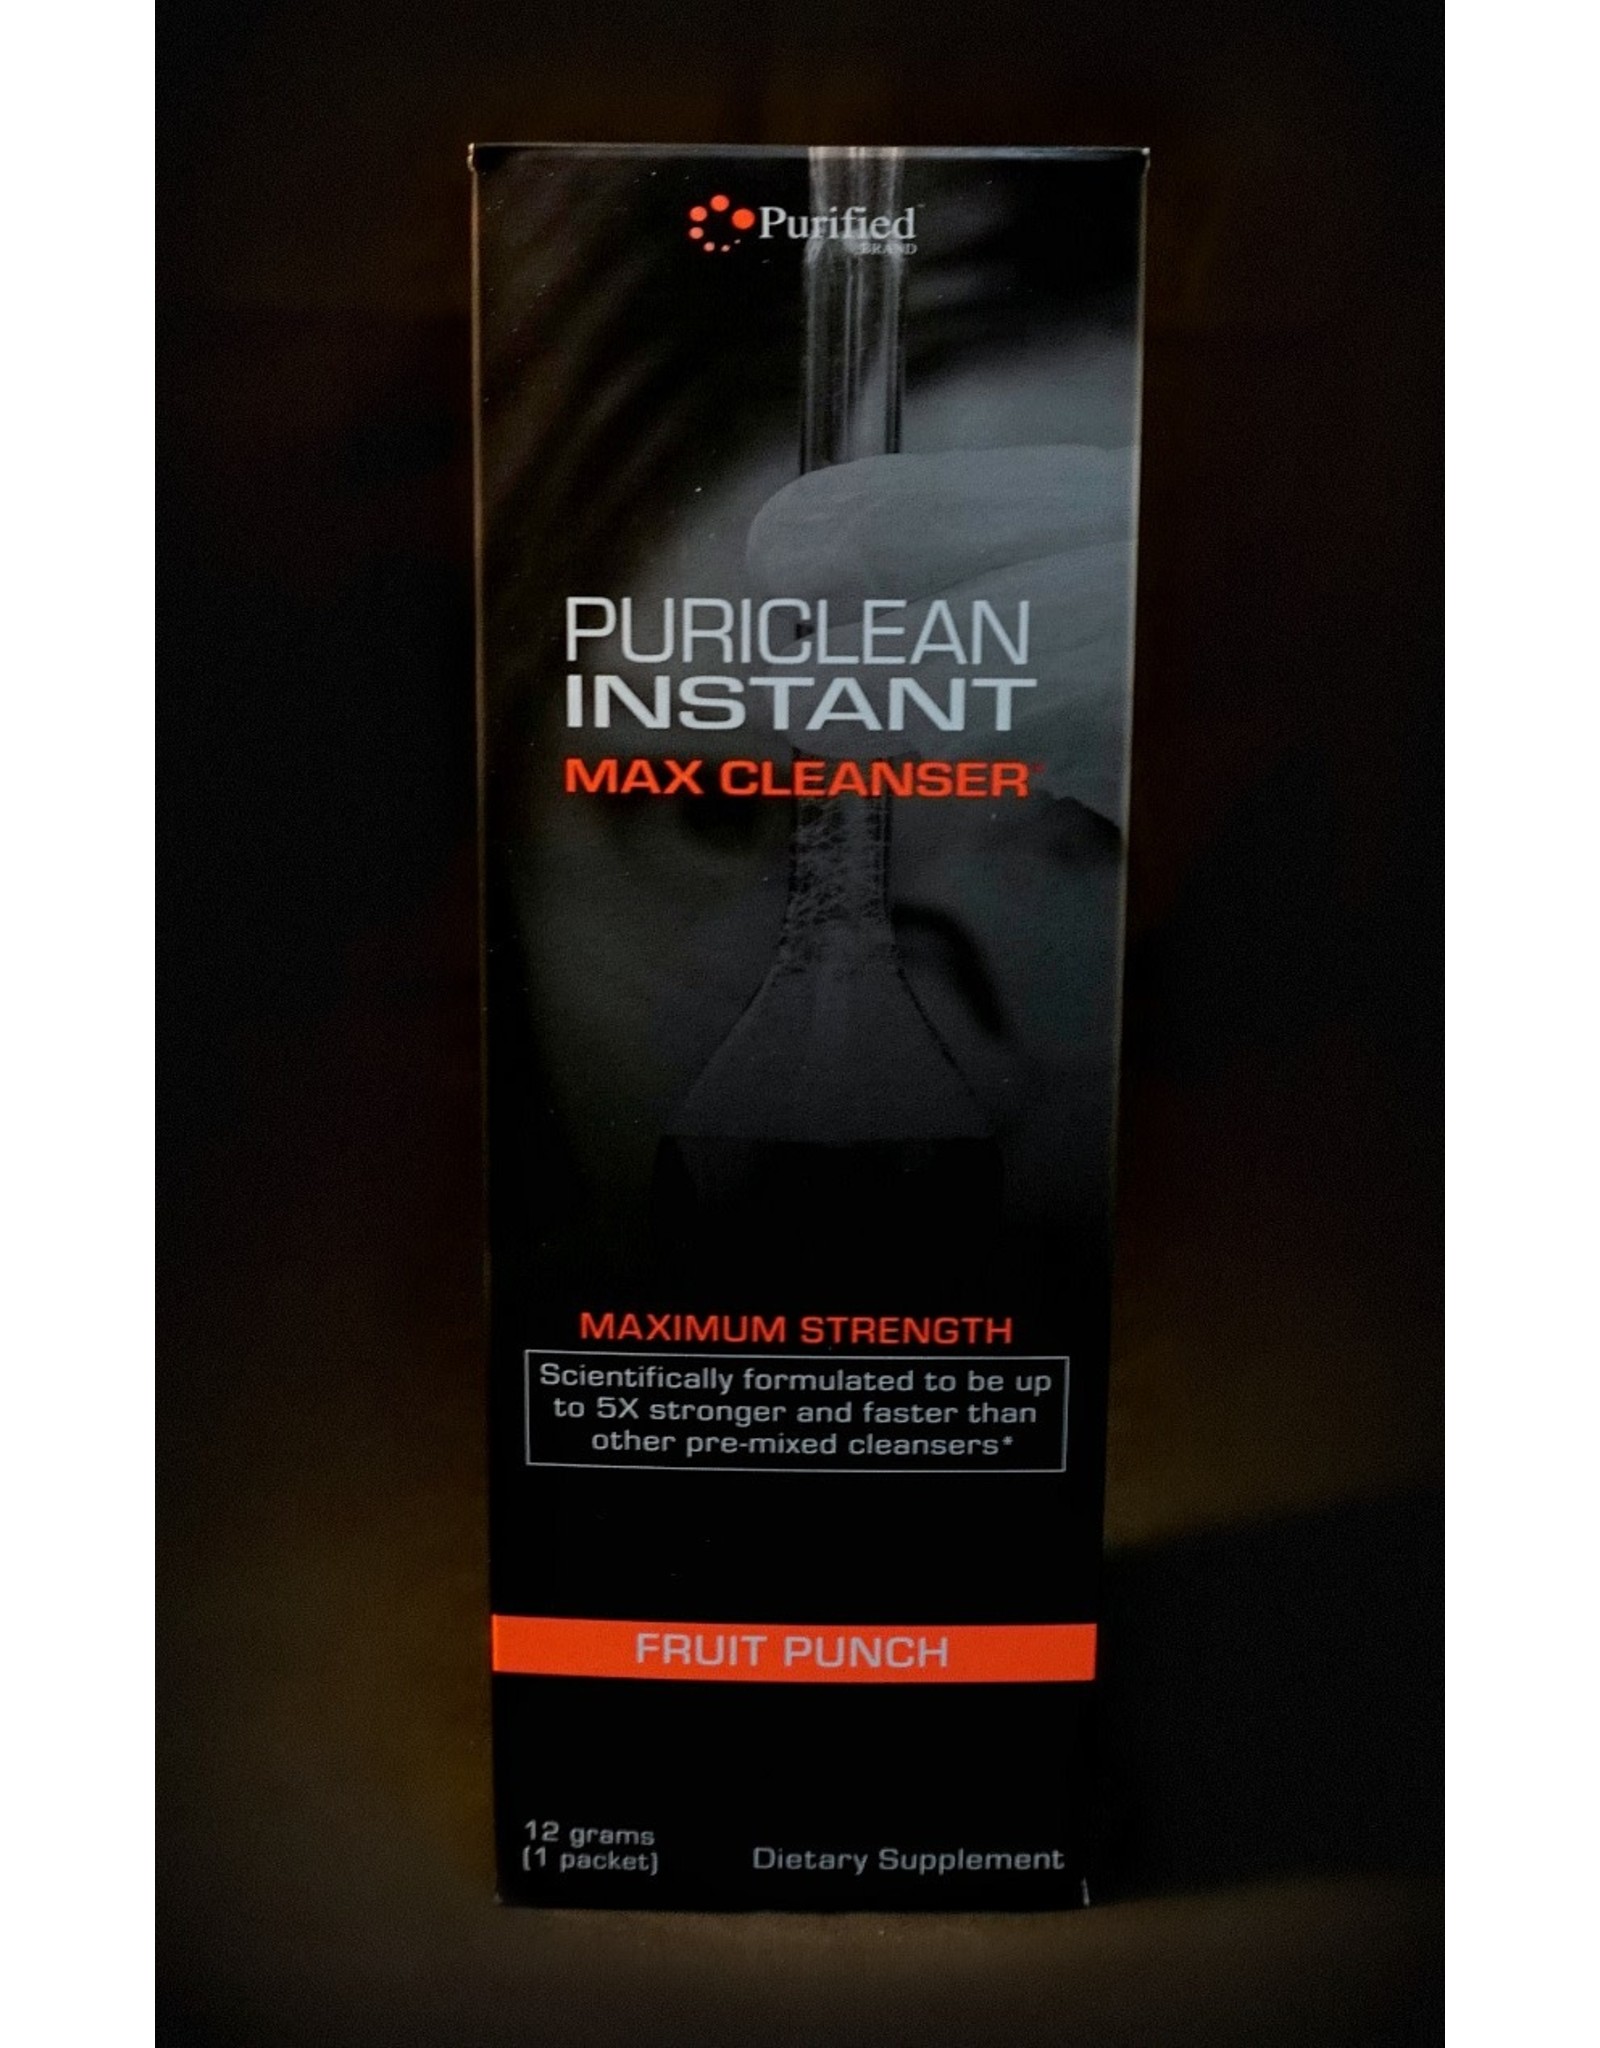 Purified Puriclean Instant Max Cleanser